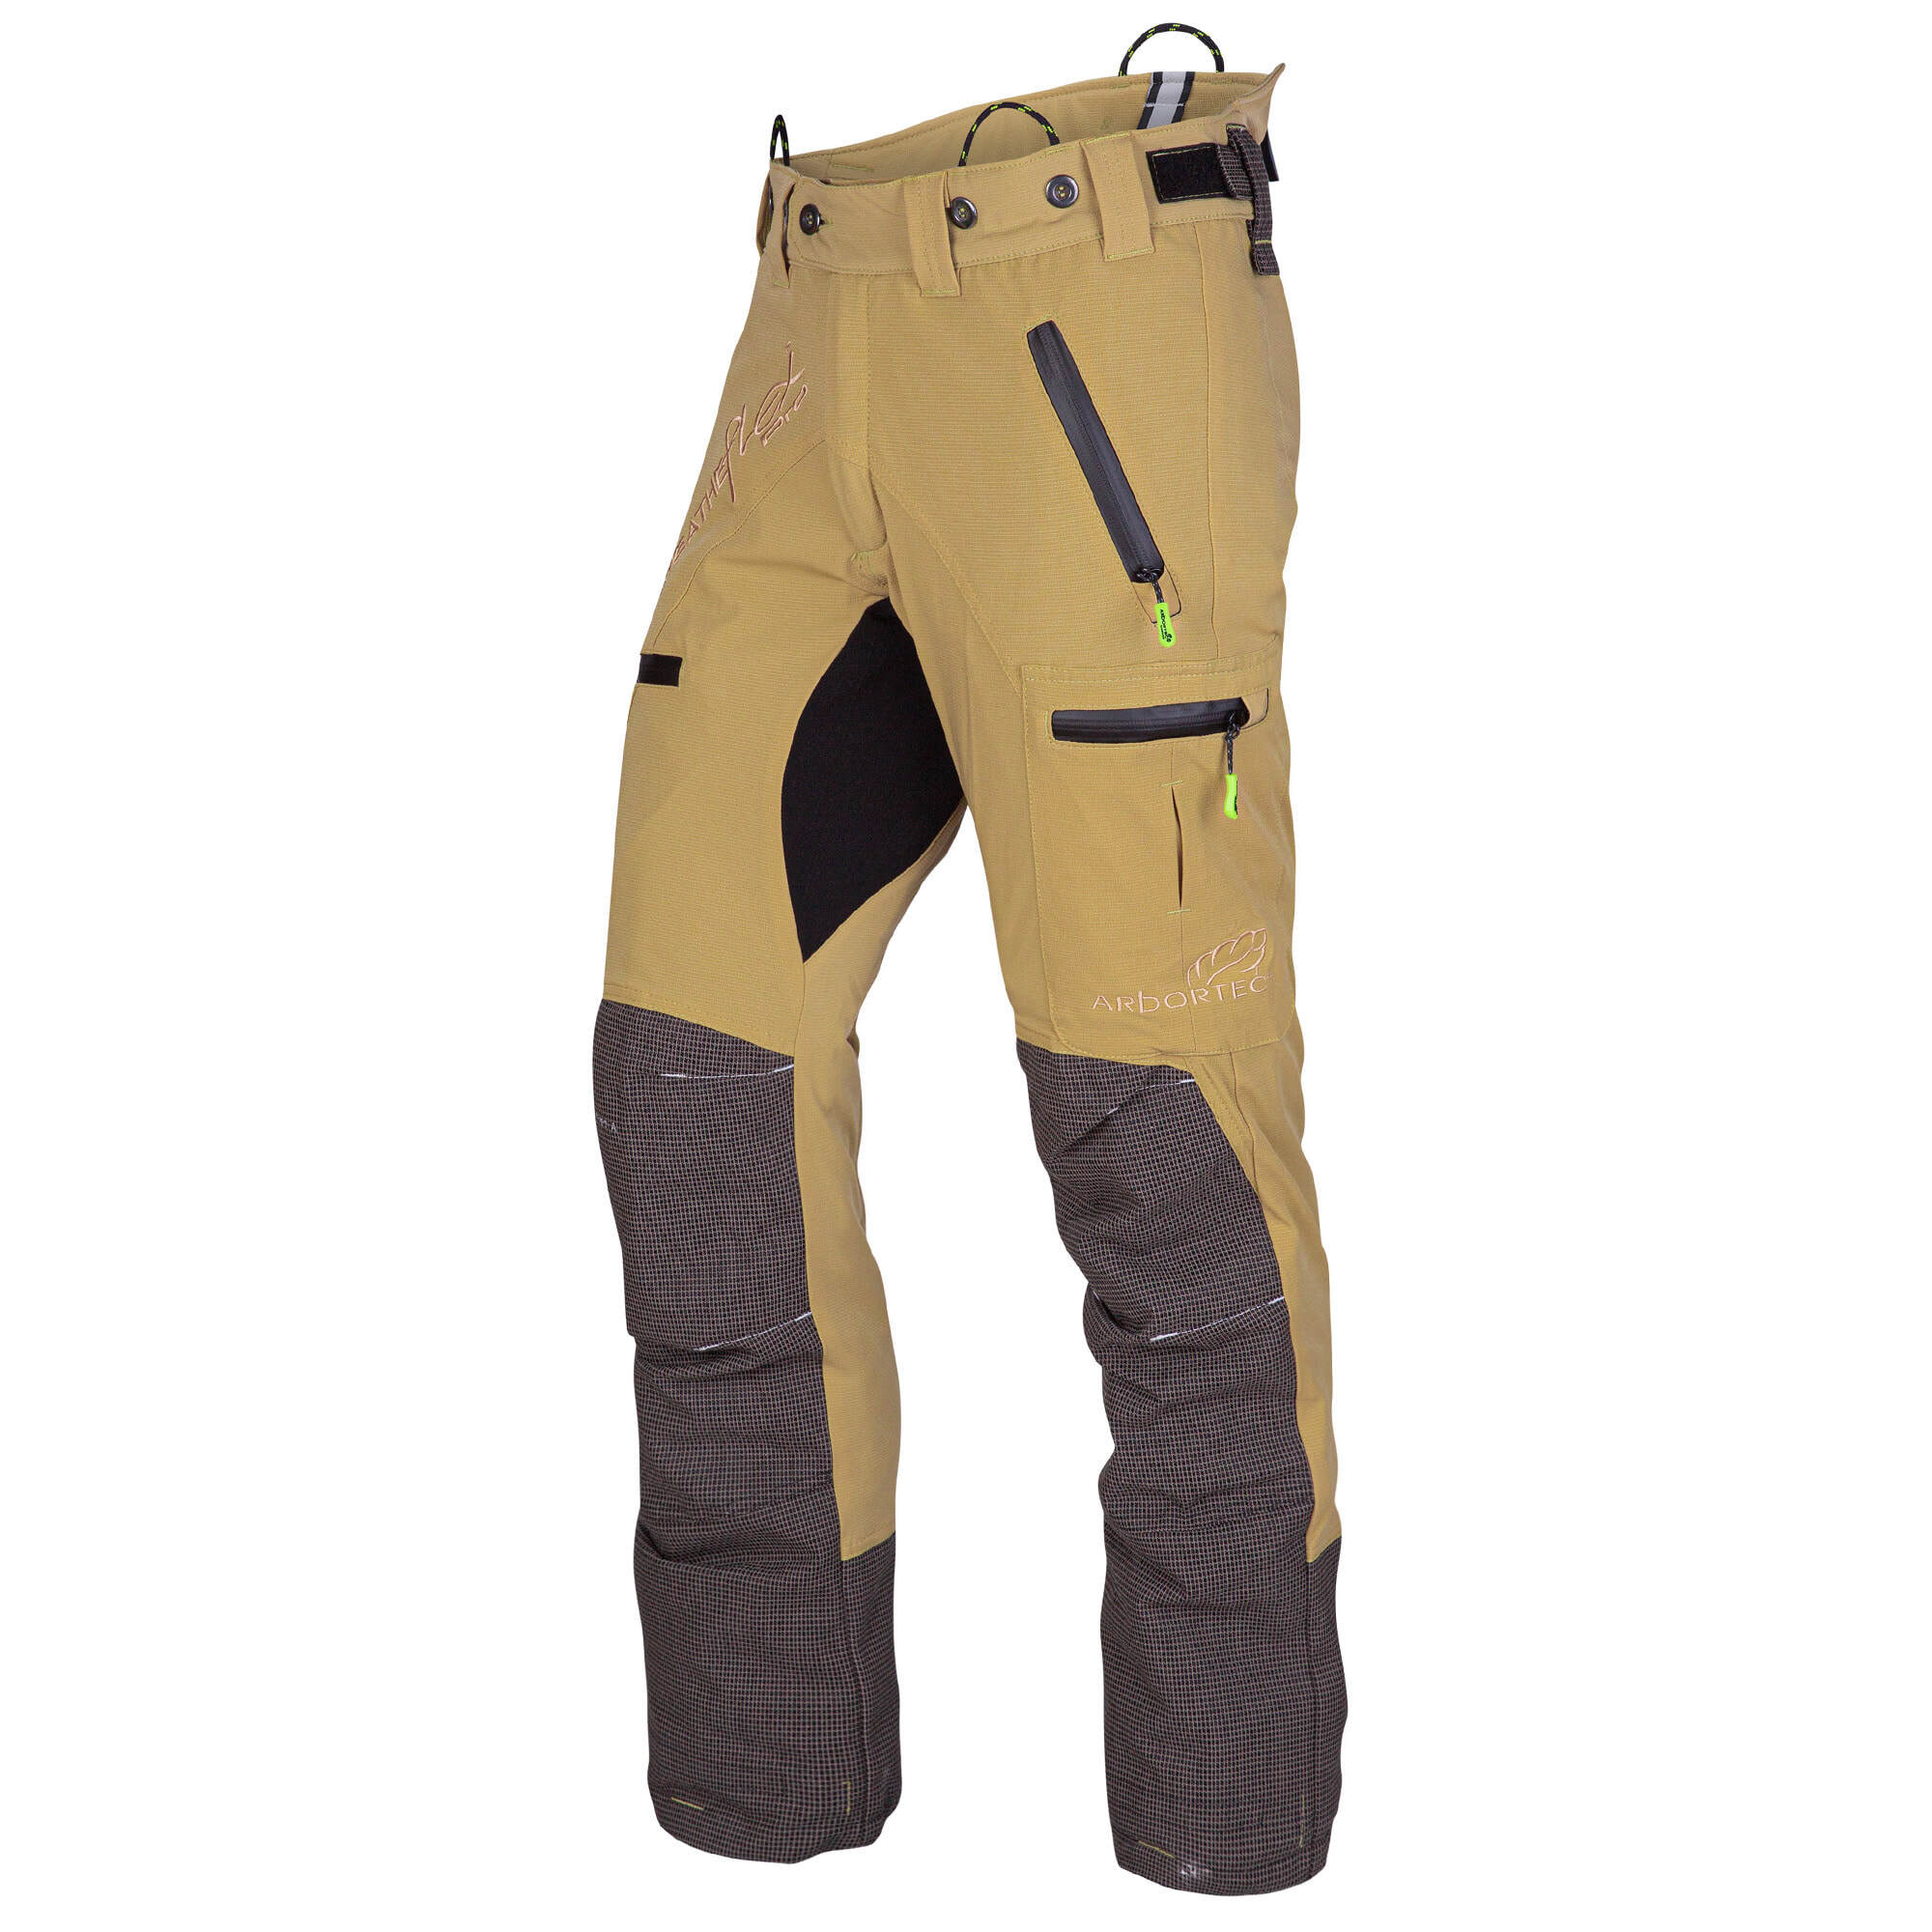 Forestry & Arboriculture Clothing and Equipment | Outwear